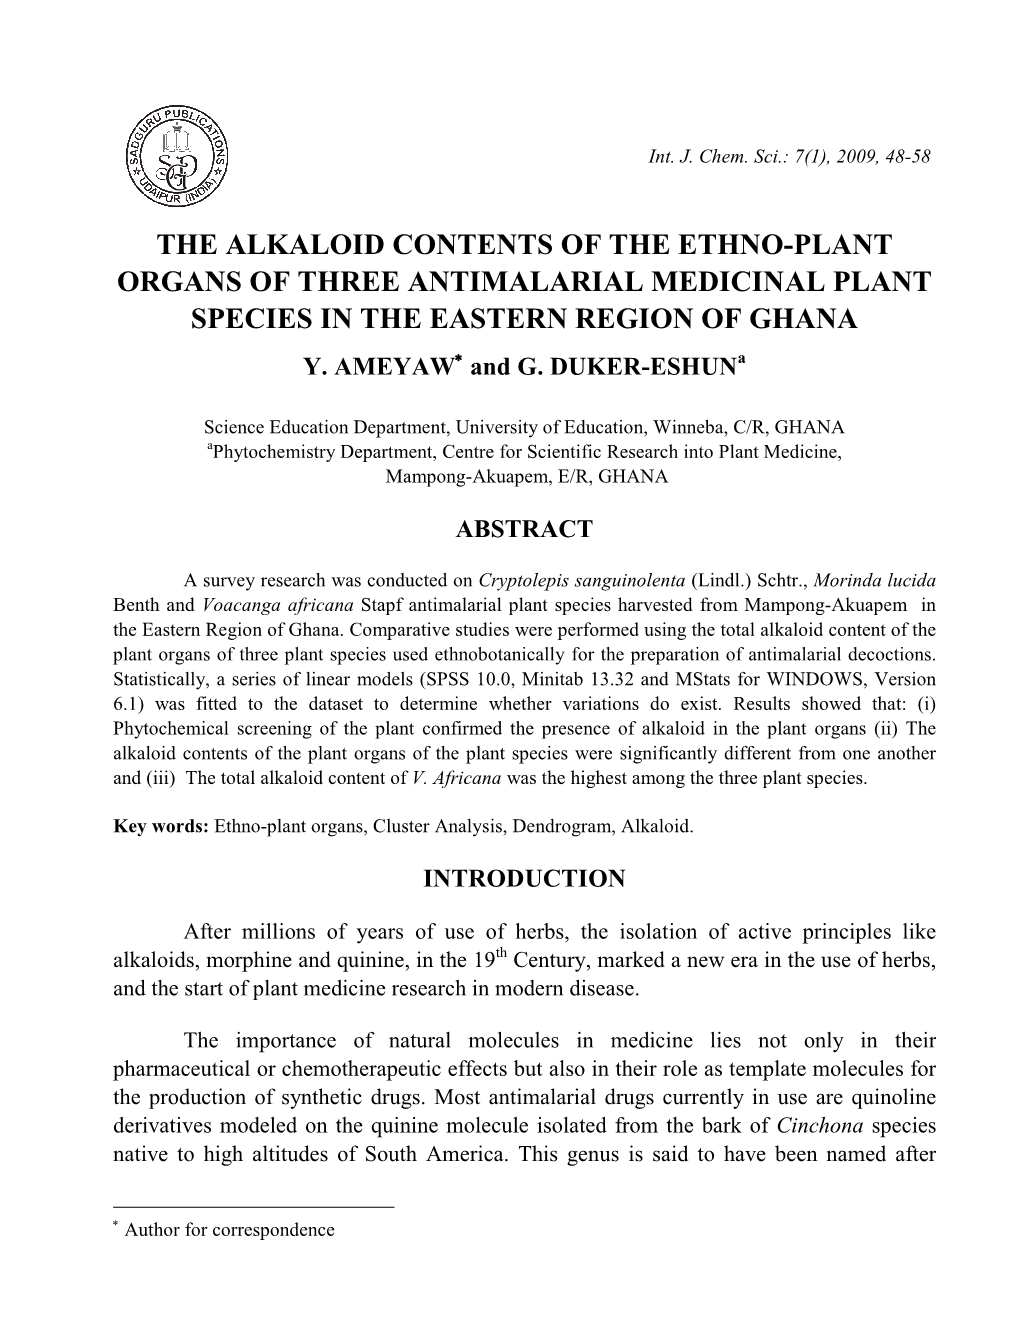 The Alkaloid Contents of the Ethno-Plant Organs of Three Antimalarial Medicin Al Plant Species in the Eastern Region of Ghana Y